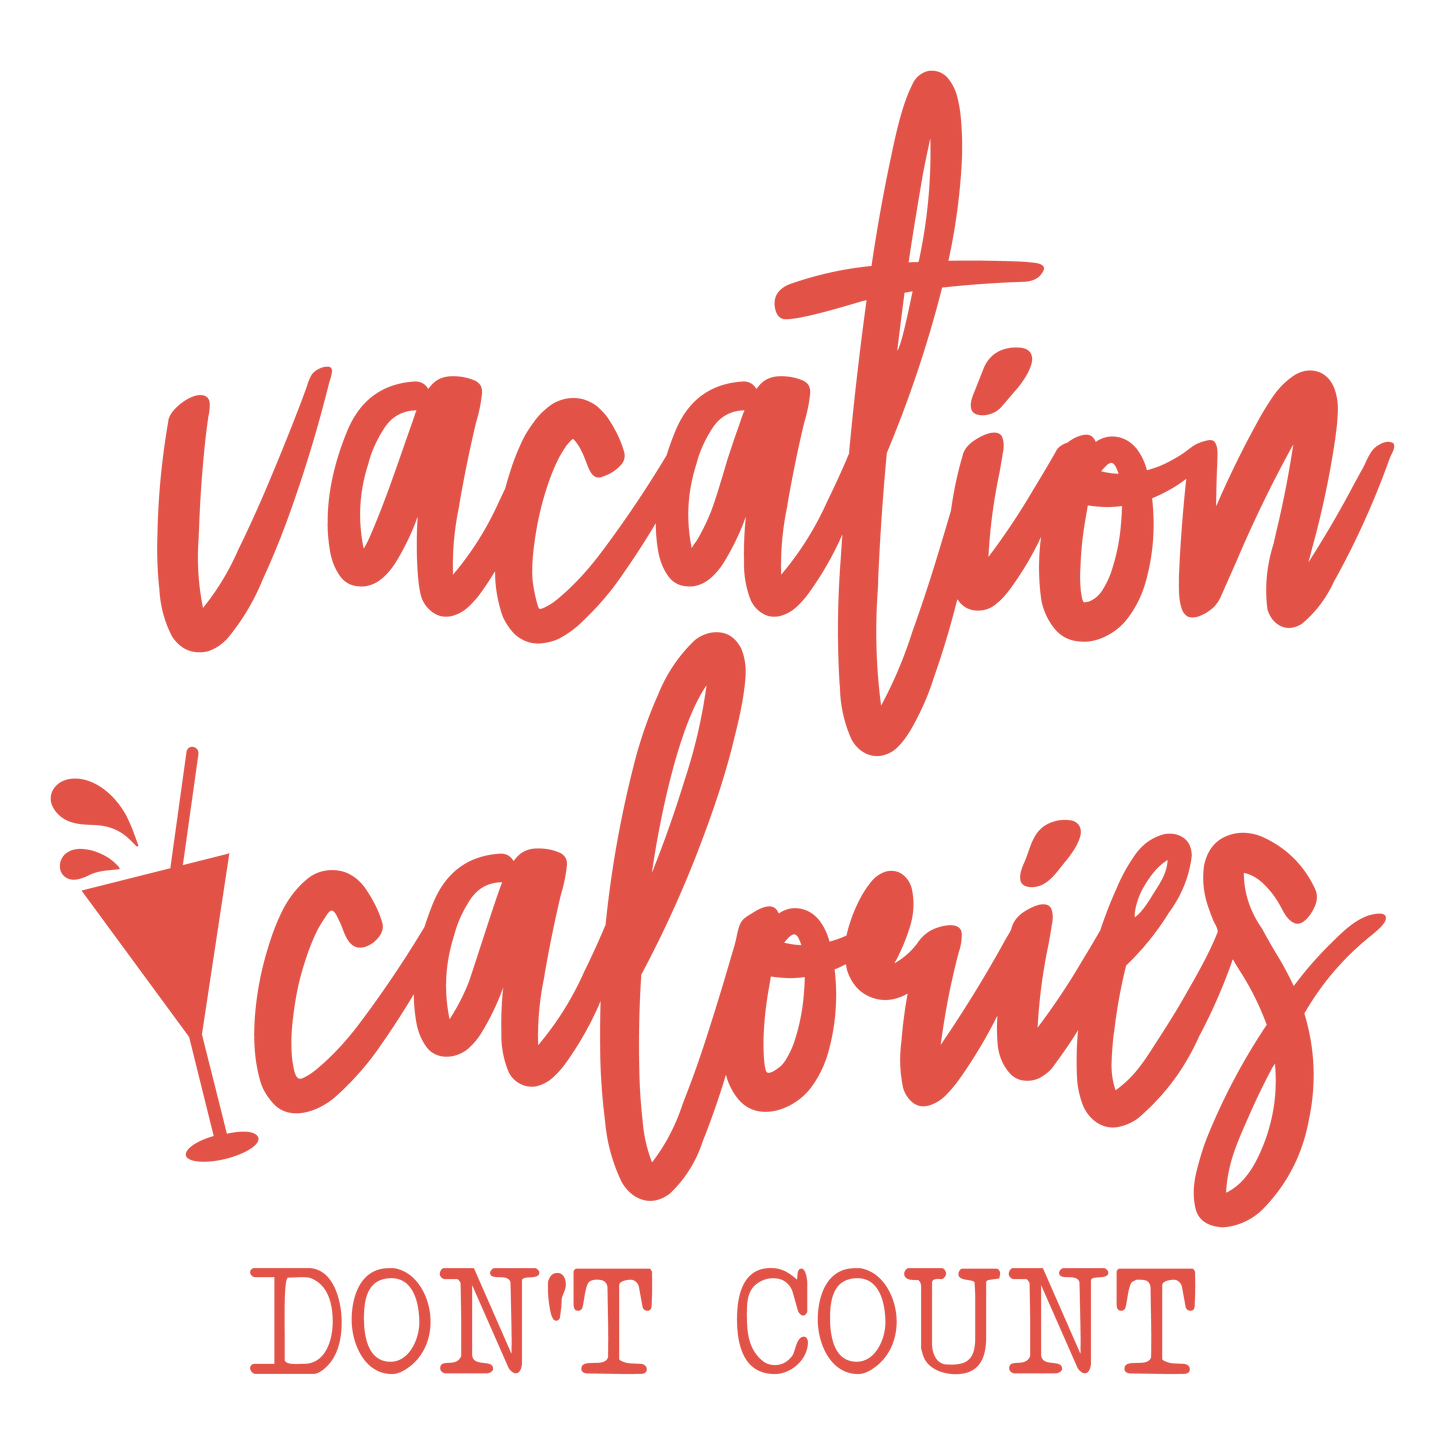 VACATION CALORIES DONT COUNT